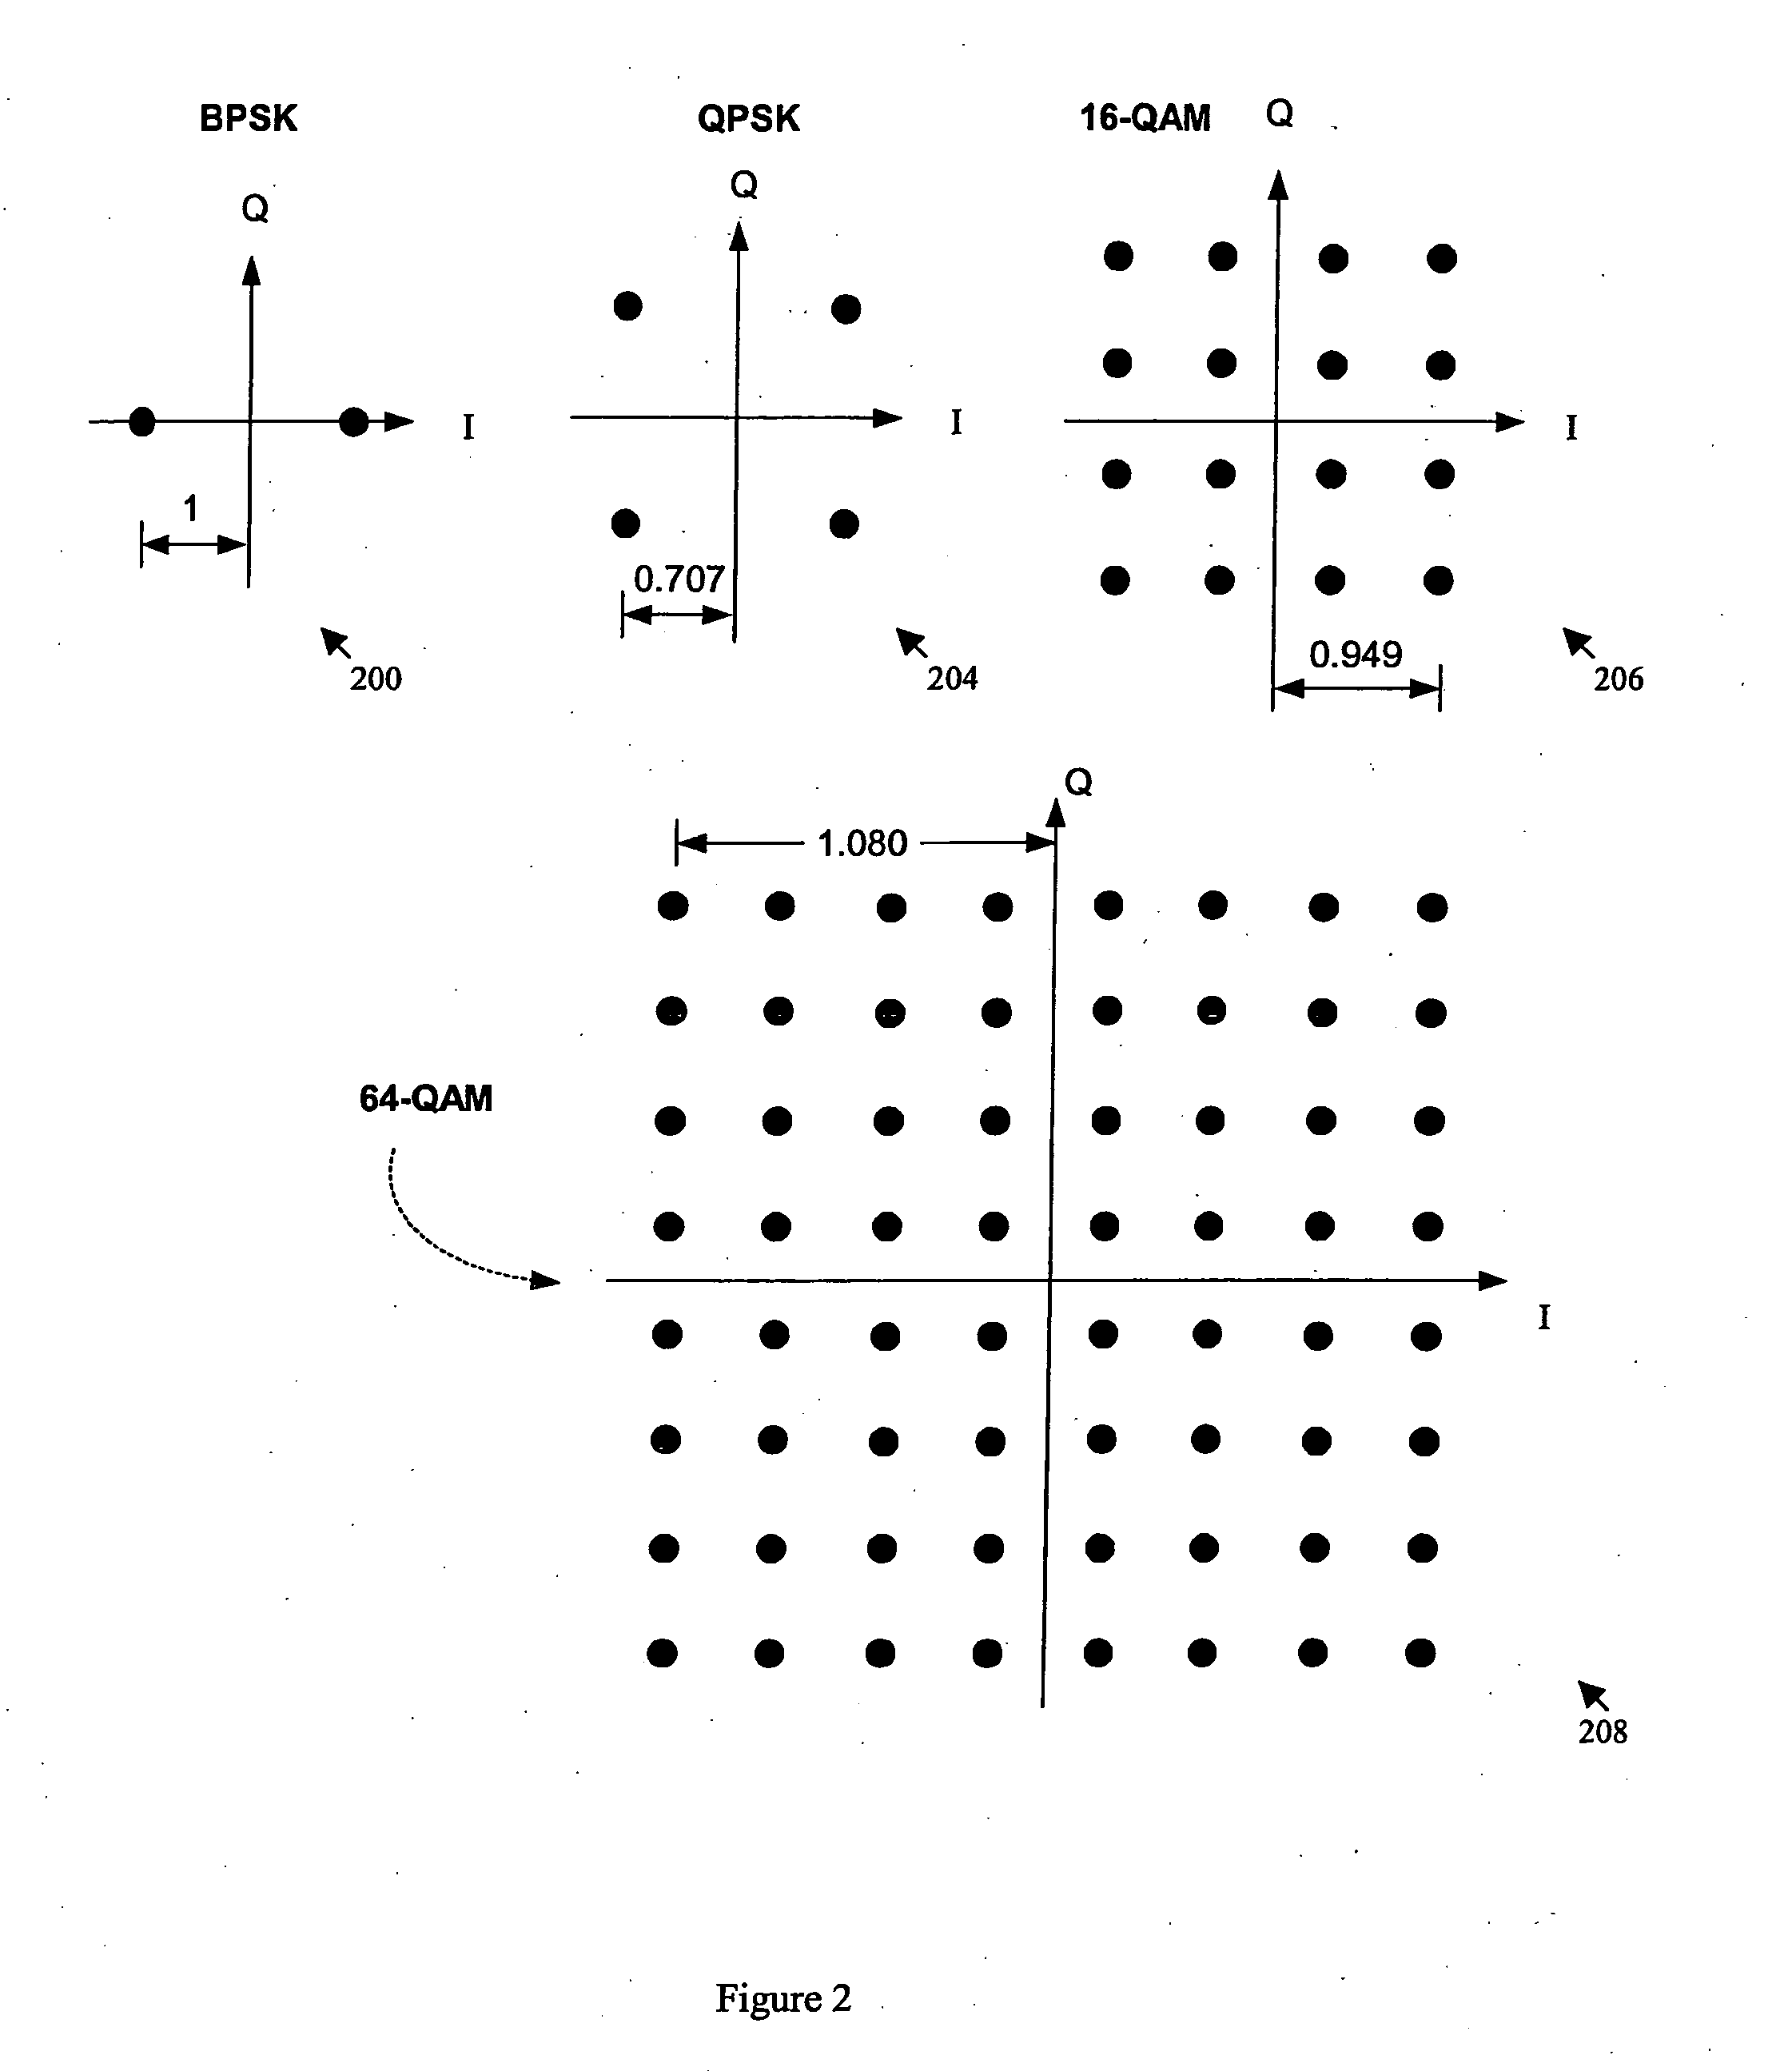 Crest factor reduction system and method for OFDM transmission systems using selective sub-carrier degradation